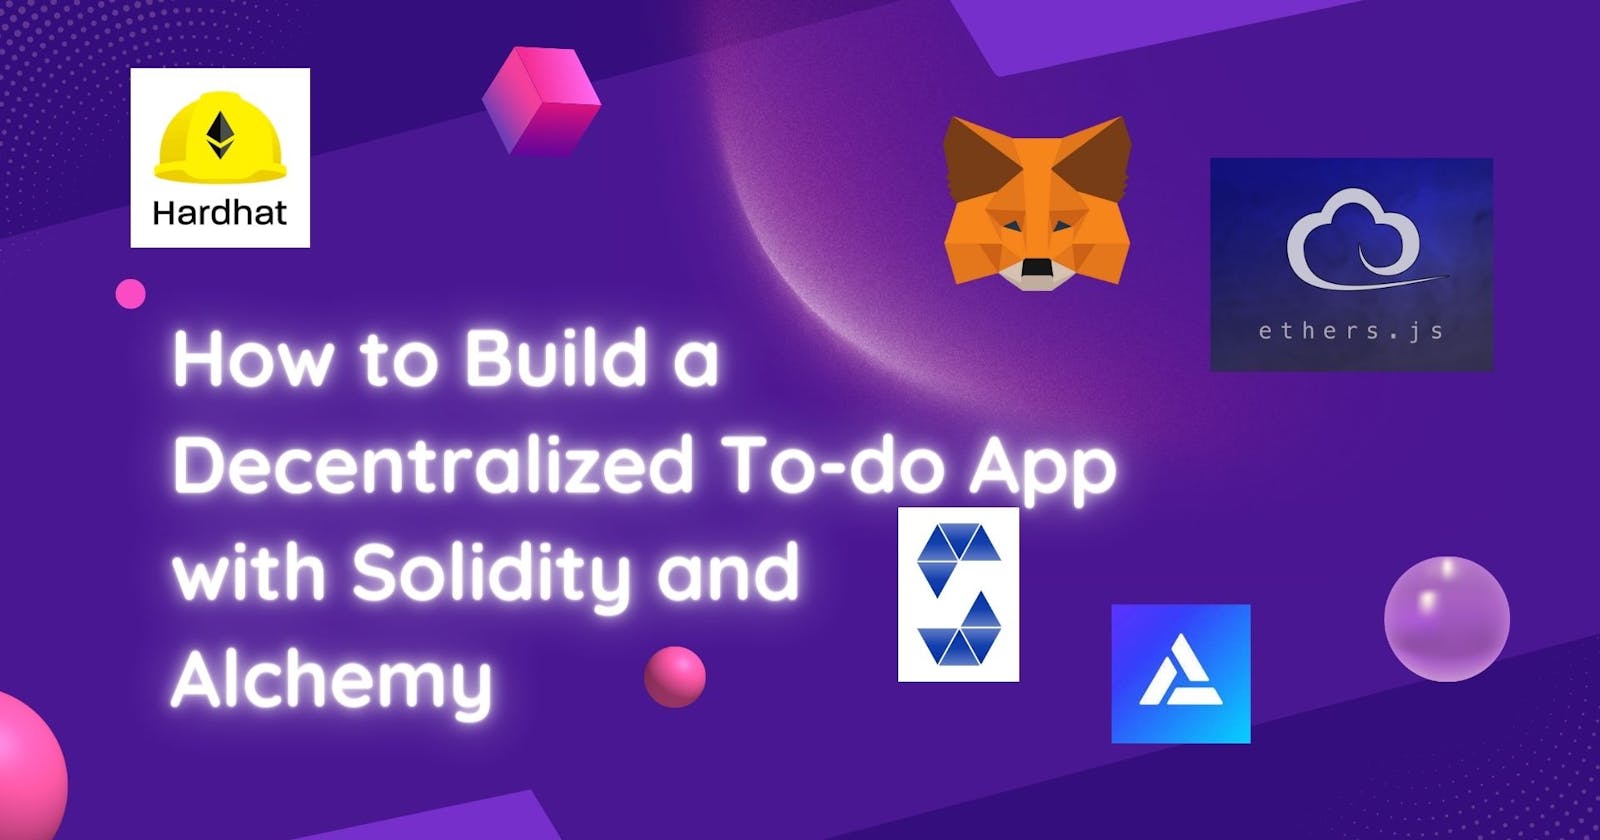 How to Build a Decentralized To-do App with Solidity and Alchemy